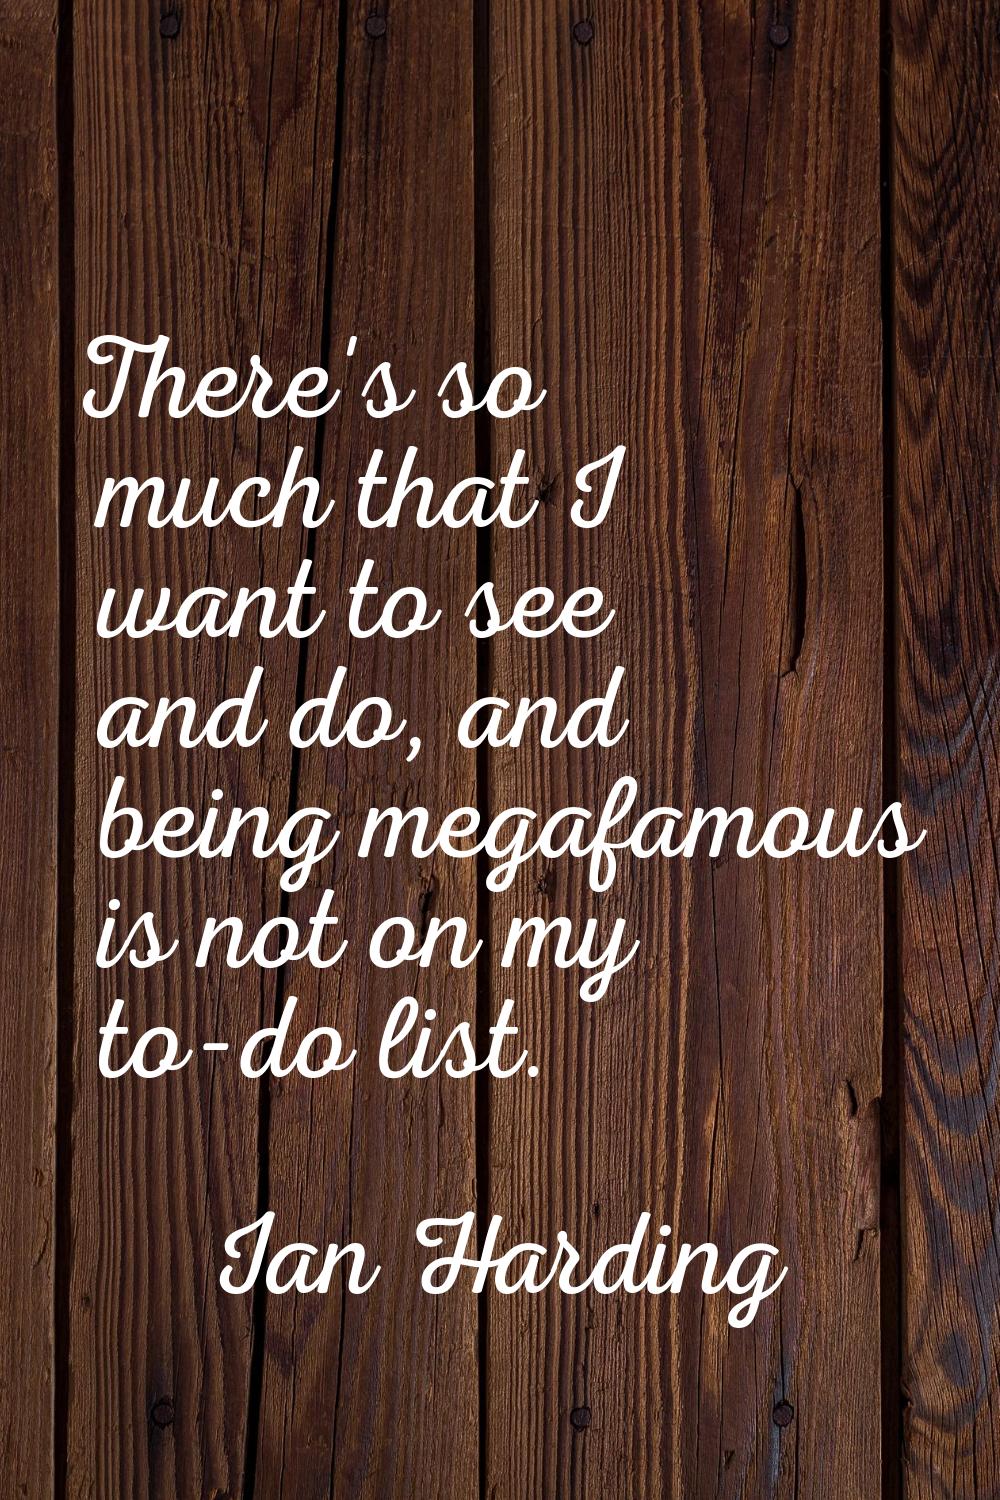 There's so much that I want to see and do, and being megafamous is not on my to-do list.